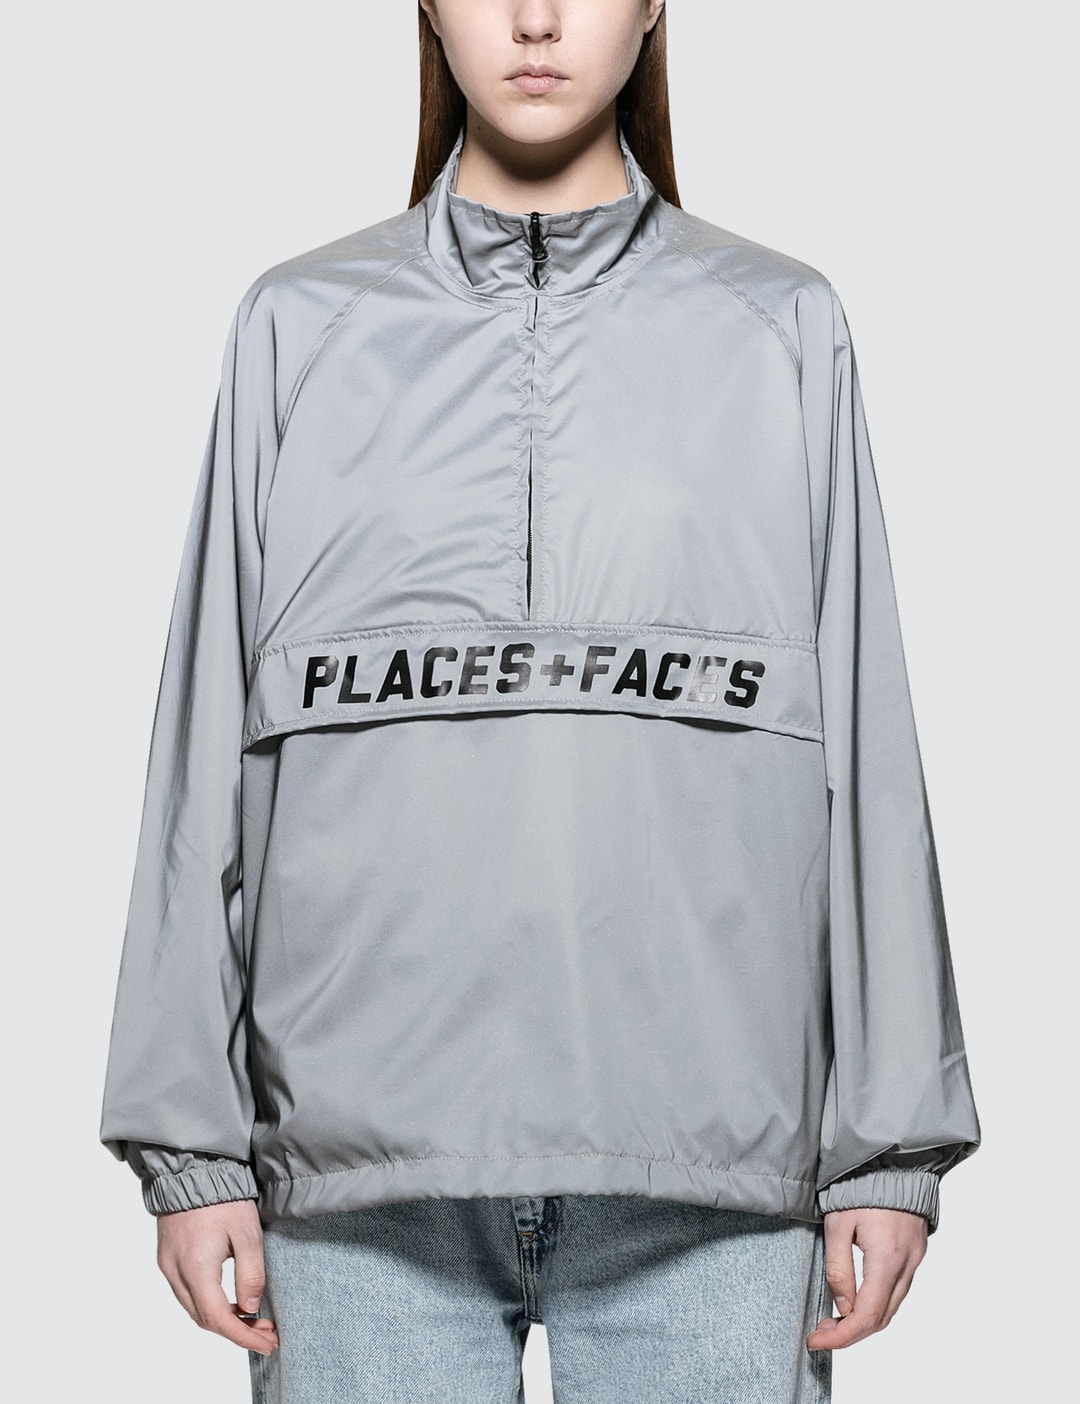 Places + Faces - Waist Bag  HBX - Globally Curated Fashion and